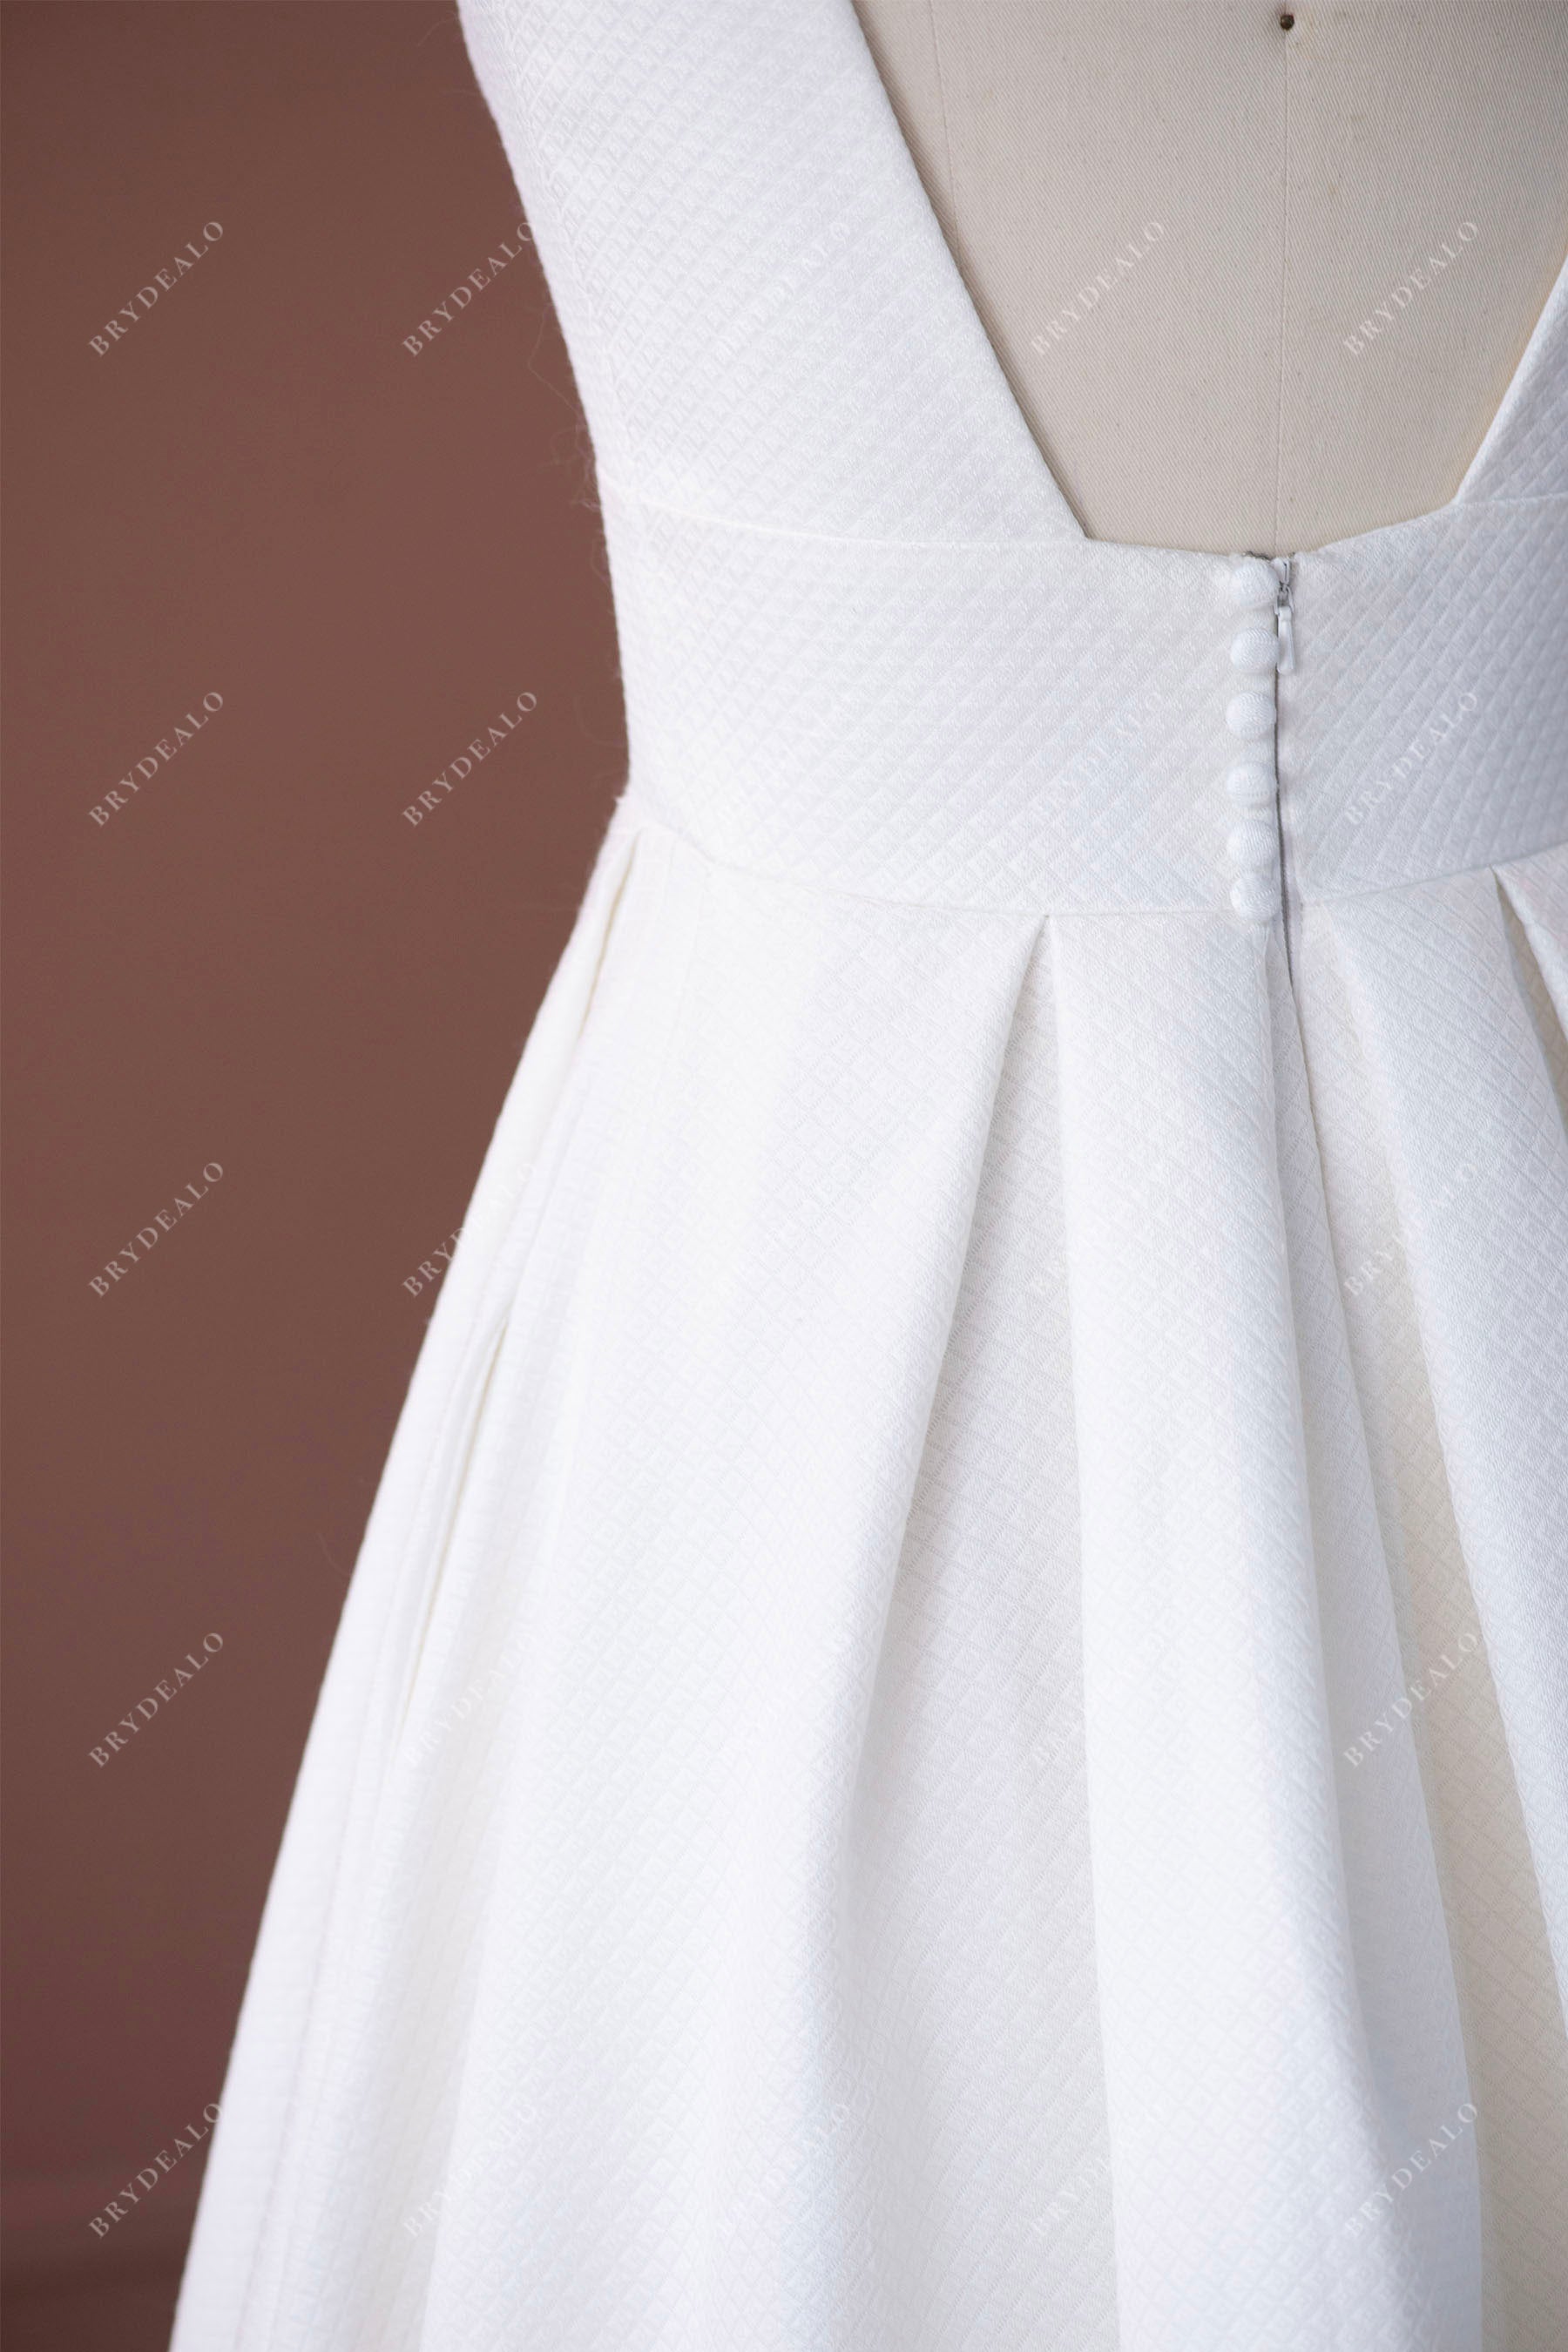 simple straps plunging A-line wedding dress sample with pockets